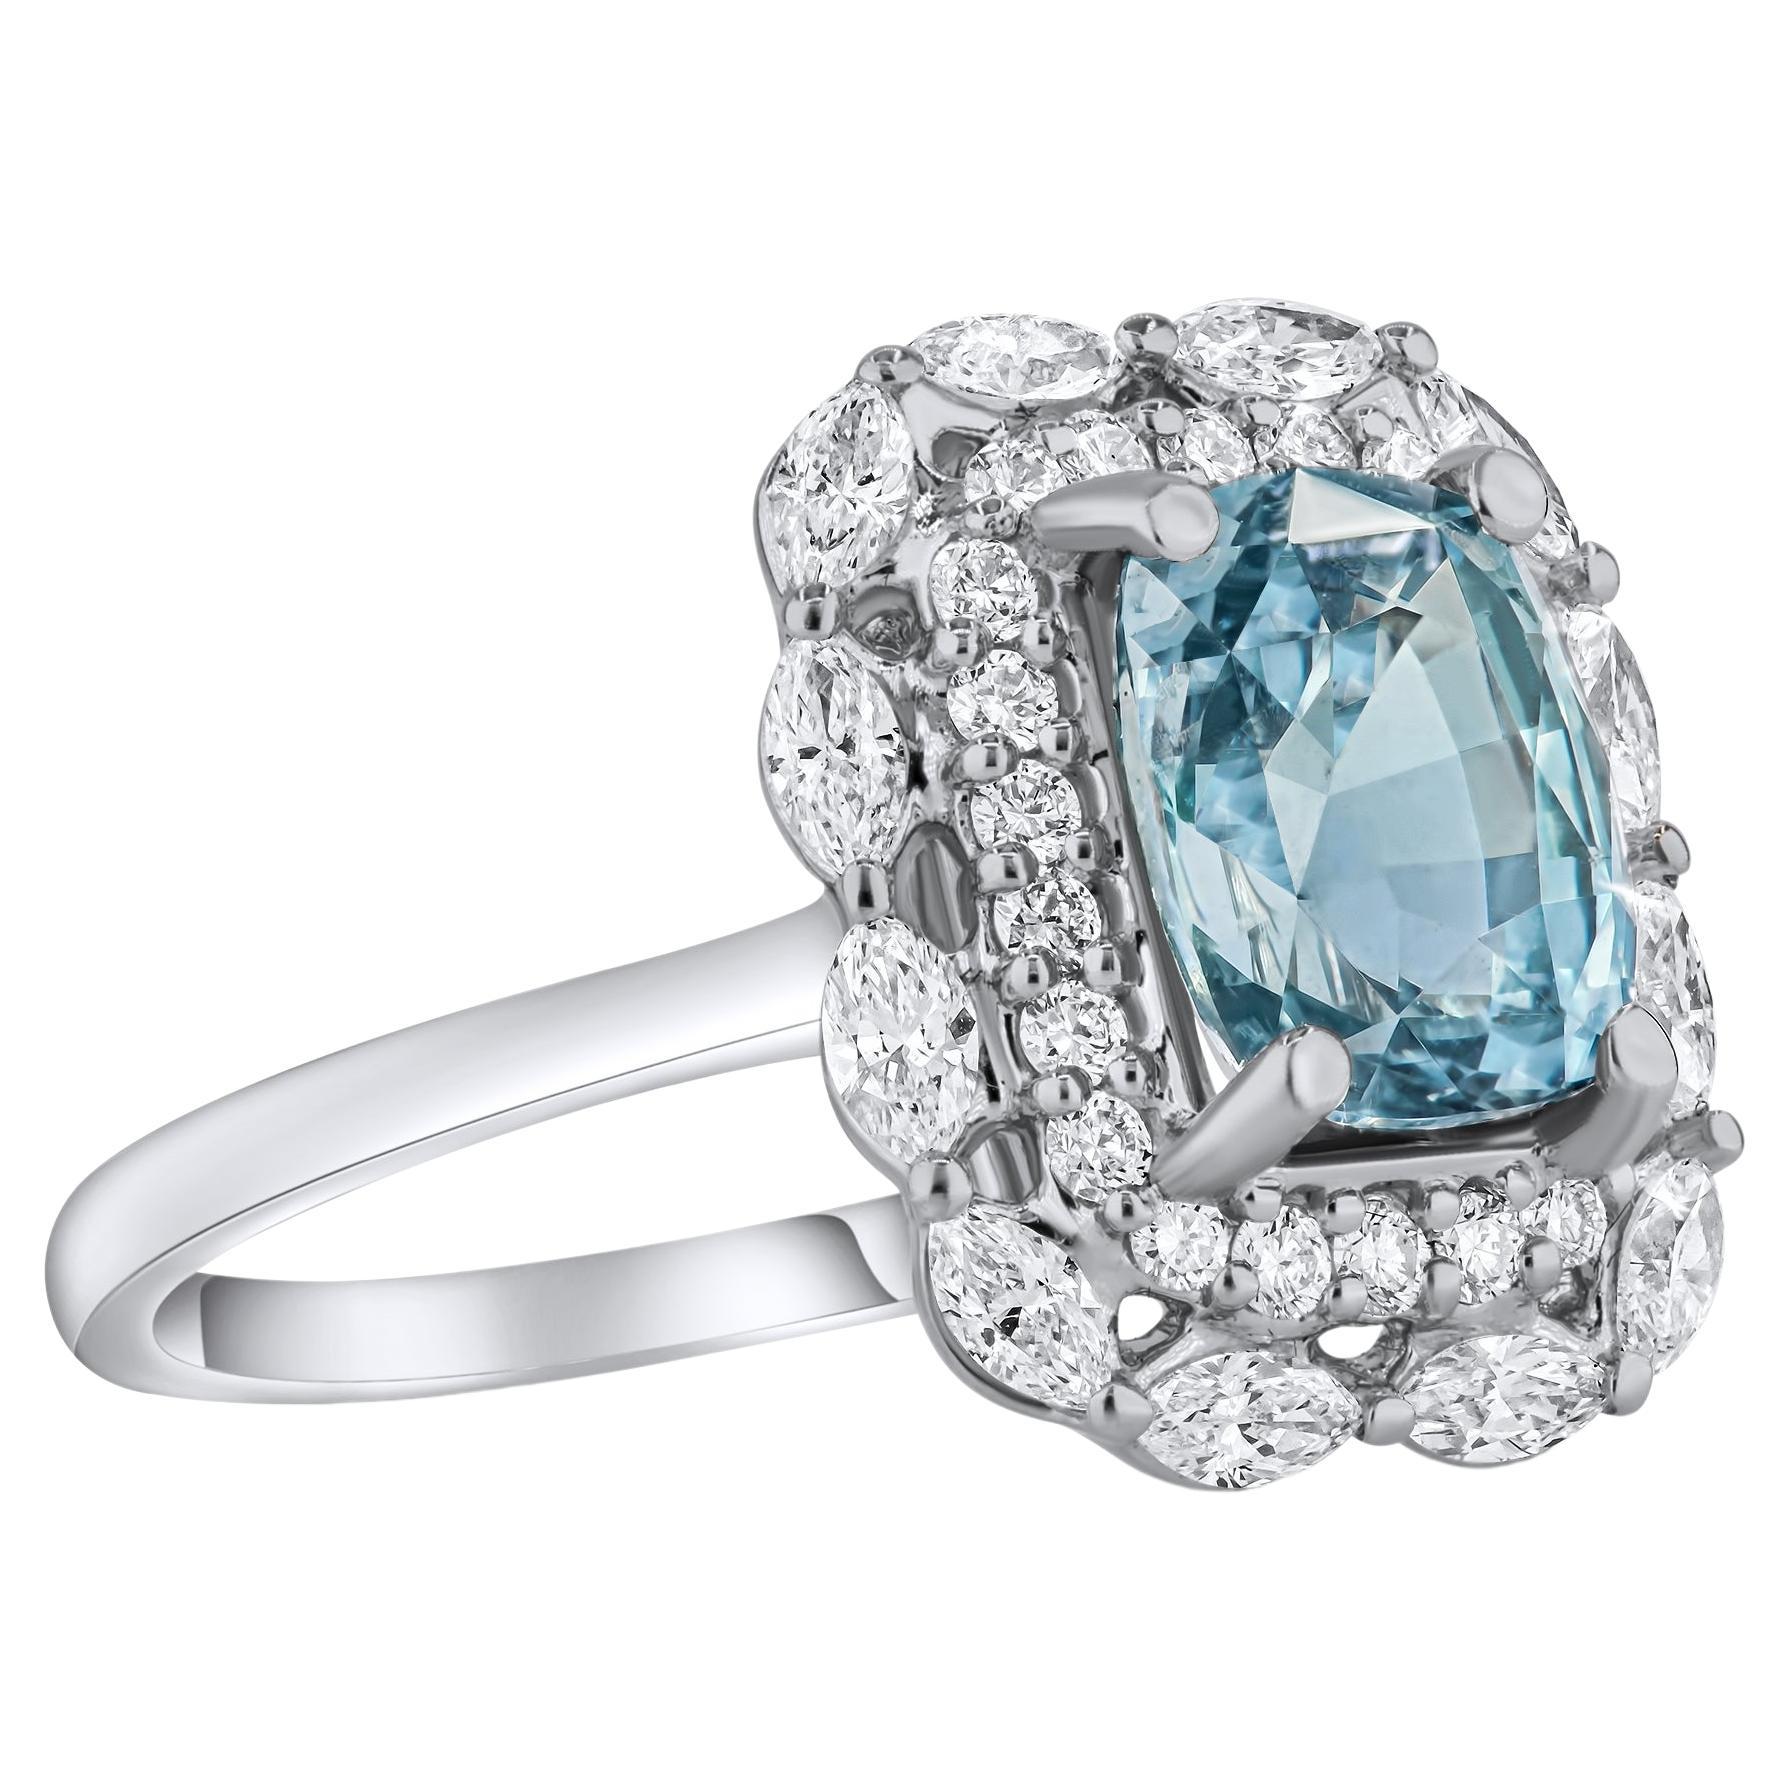 GIA Certified 2.69 Carat Cushion Cut Grey-Blue Sapphire and Diamond Ring ref1300 For Sale